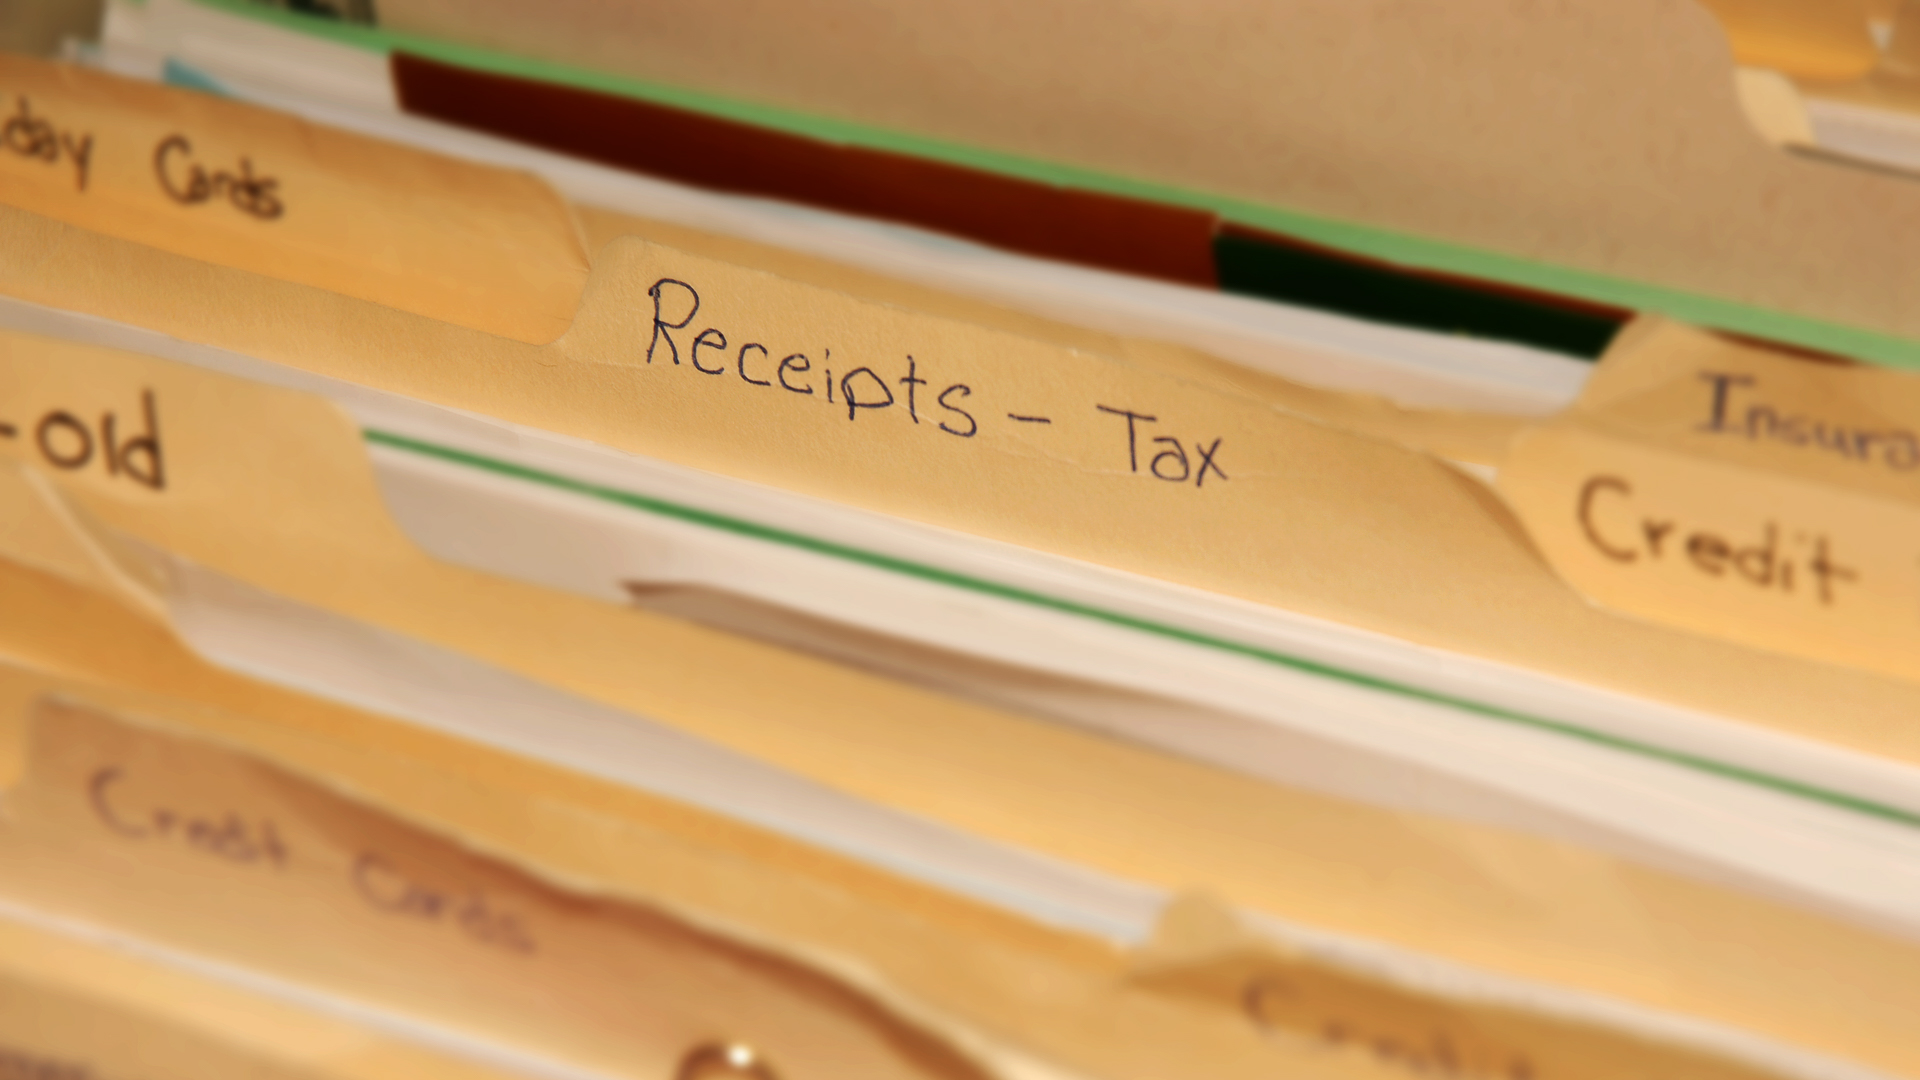 <p>Whether physical or digital, make a folder for all your documents and keep it neat.</p> <p>"Designate a place to collect all your relevant tax files, receipts, etc., throughout the year so everything is in one place and ready to go," said Alton Moore, a dually licensed attorney and CPA and founding attorney of the California-based firm <a href="https://evolutiontaxlegal.com/" rel="noreferrer noopener">Evolution Tax & Legal</a>.</p>